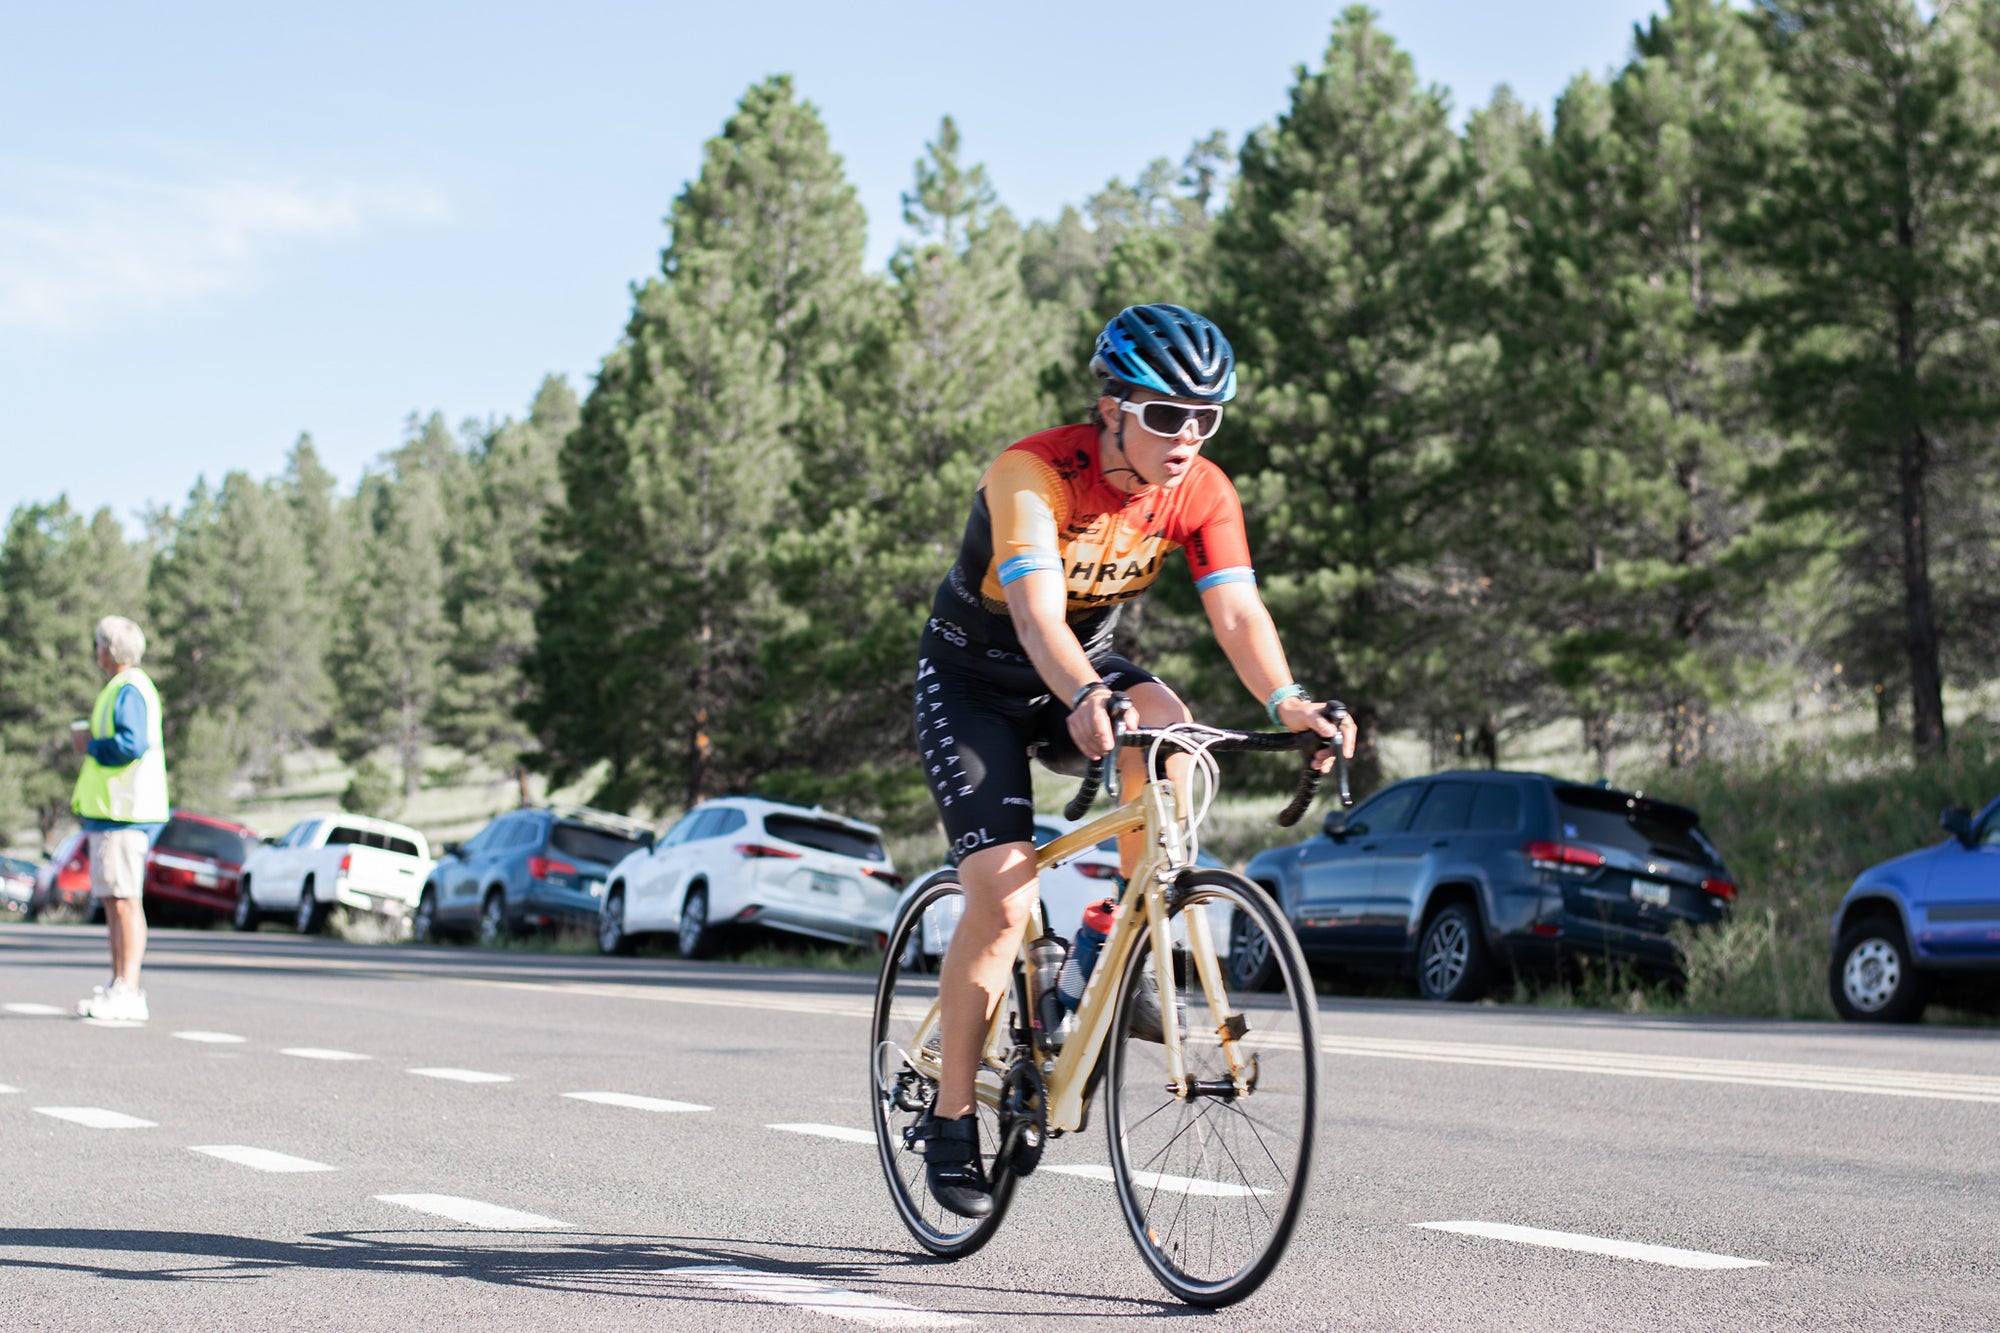 Mountain man triathlon, one of the best sprint and olympic distance triathlons in the United States